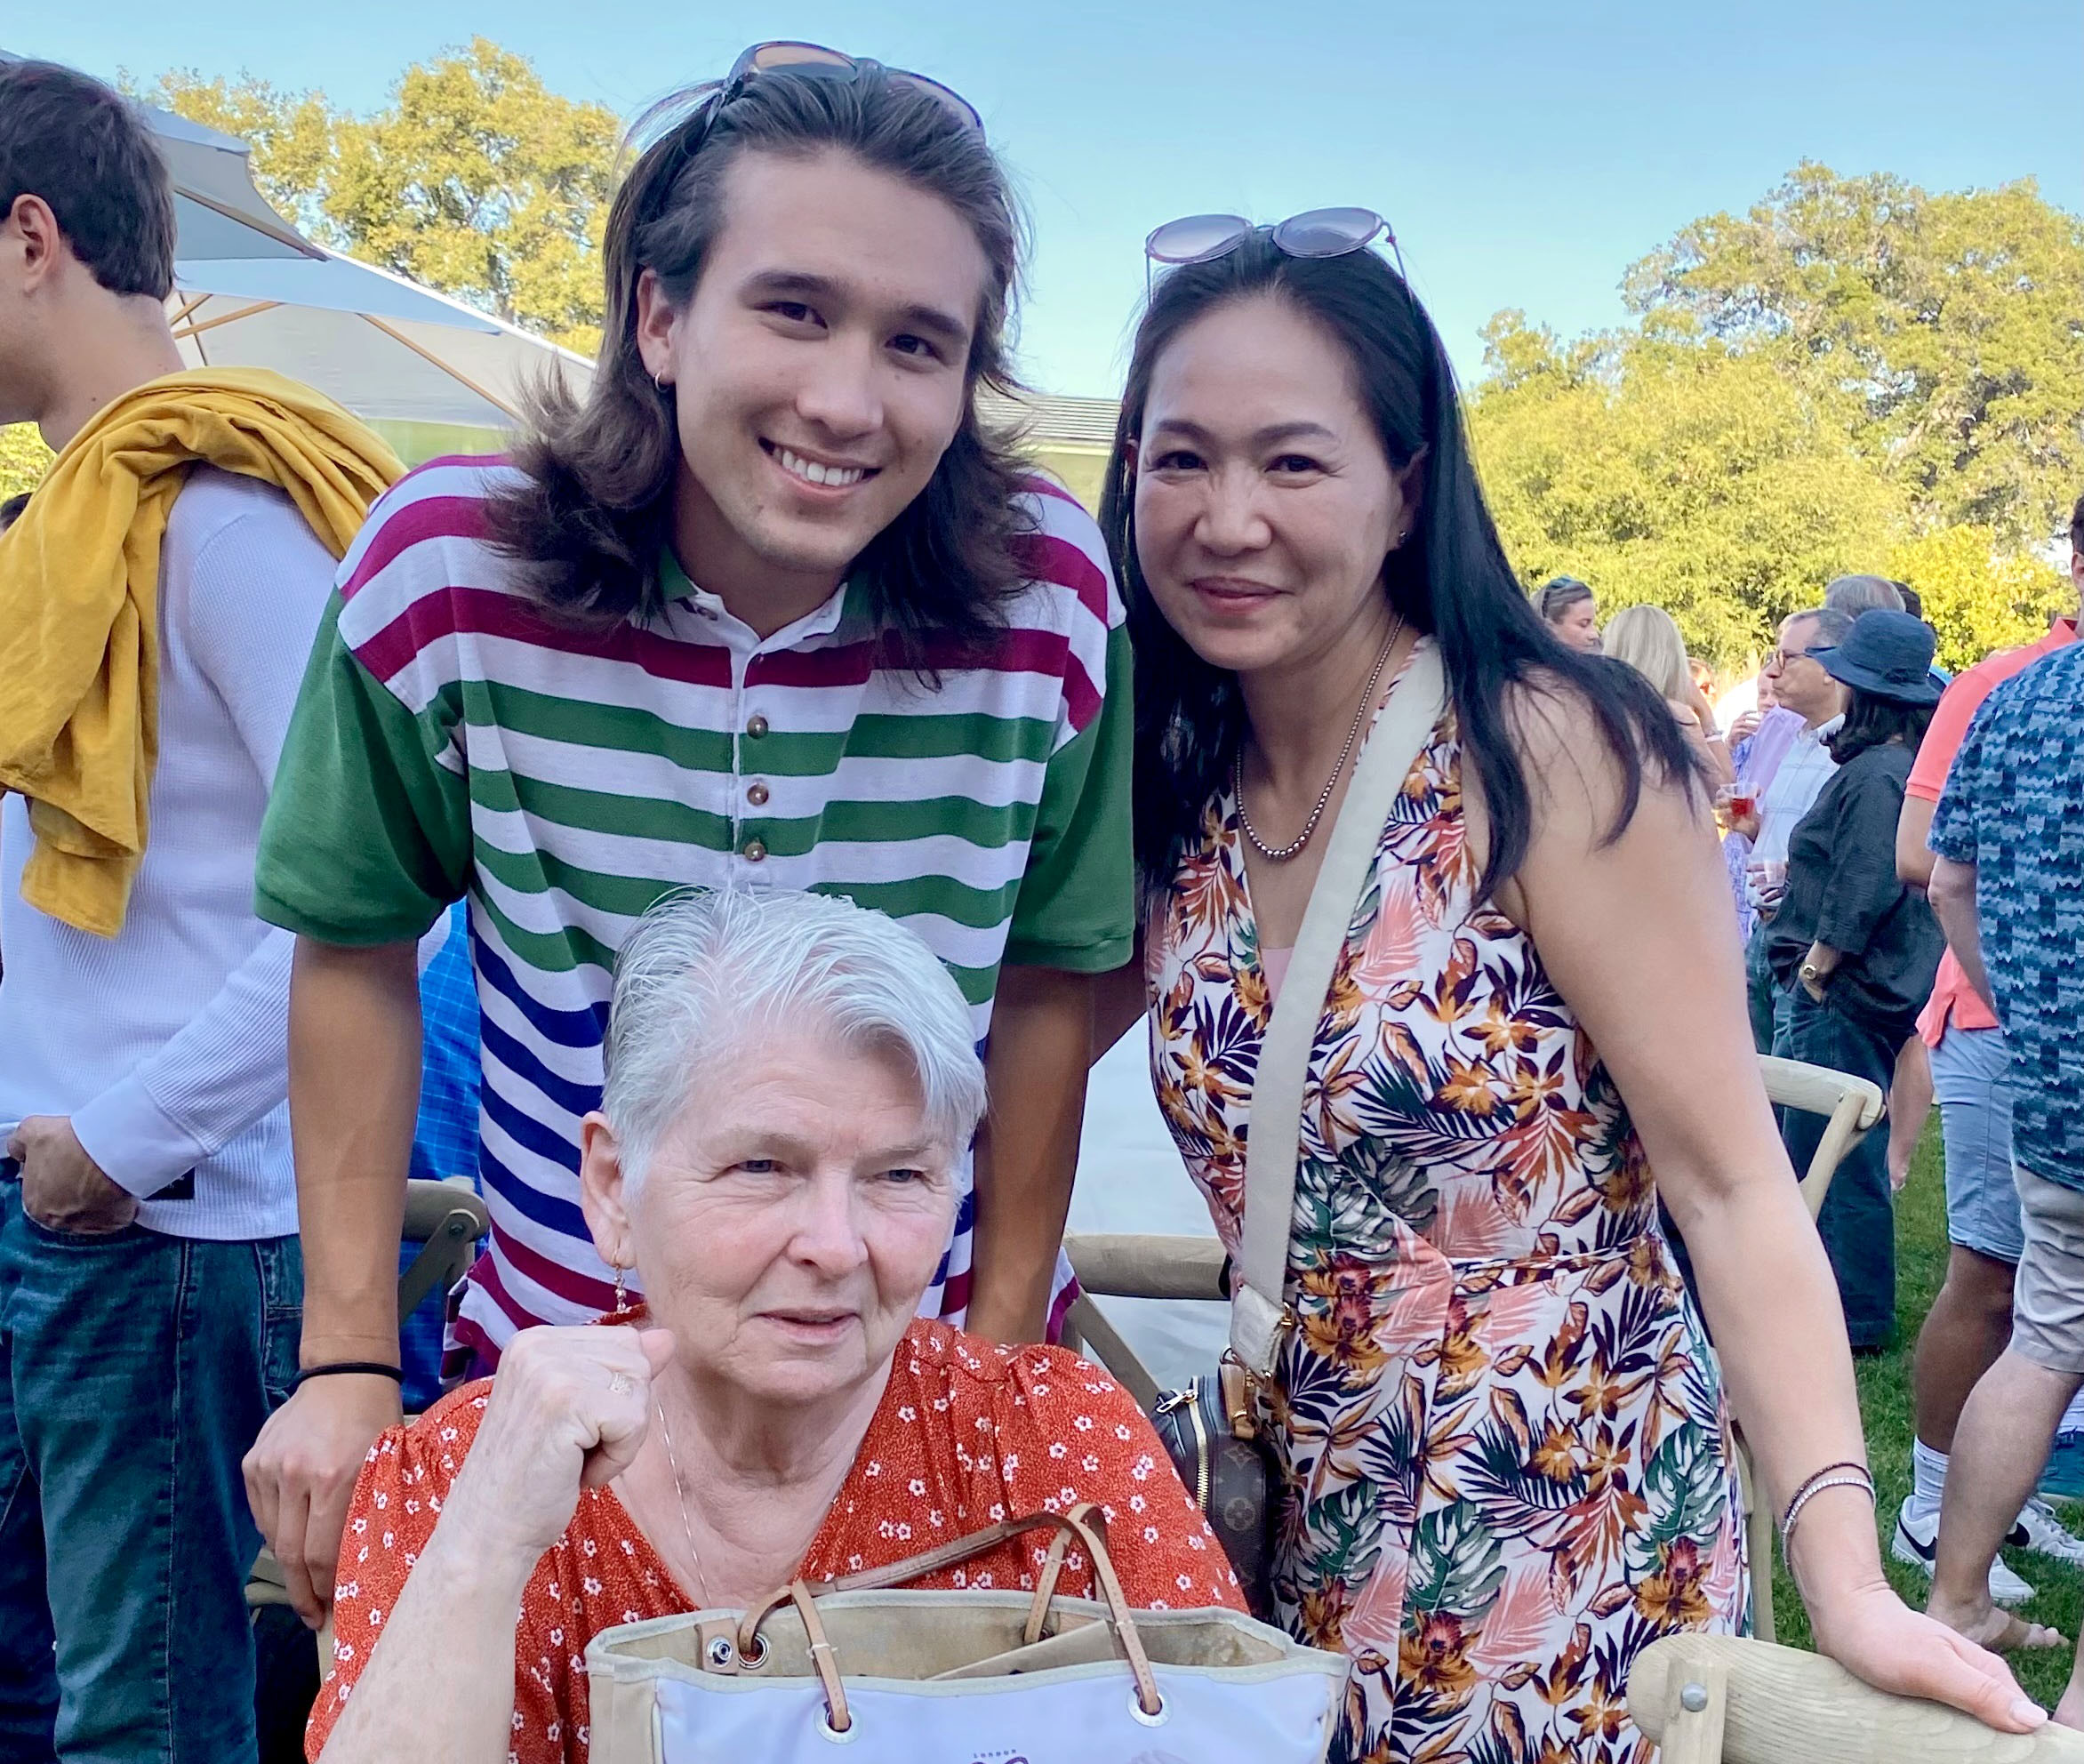 Max Proctor ’22 and his mother stand behind his seated grandmother at CMC's 2022 Commencement.